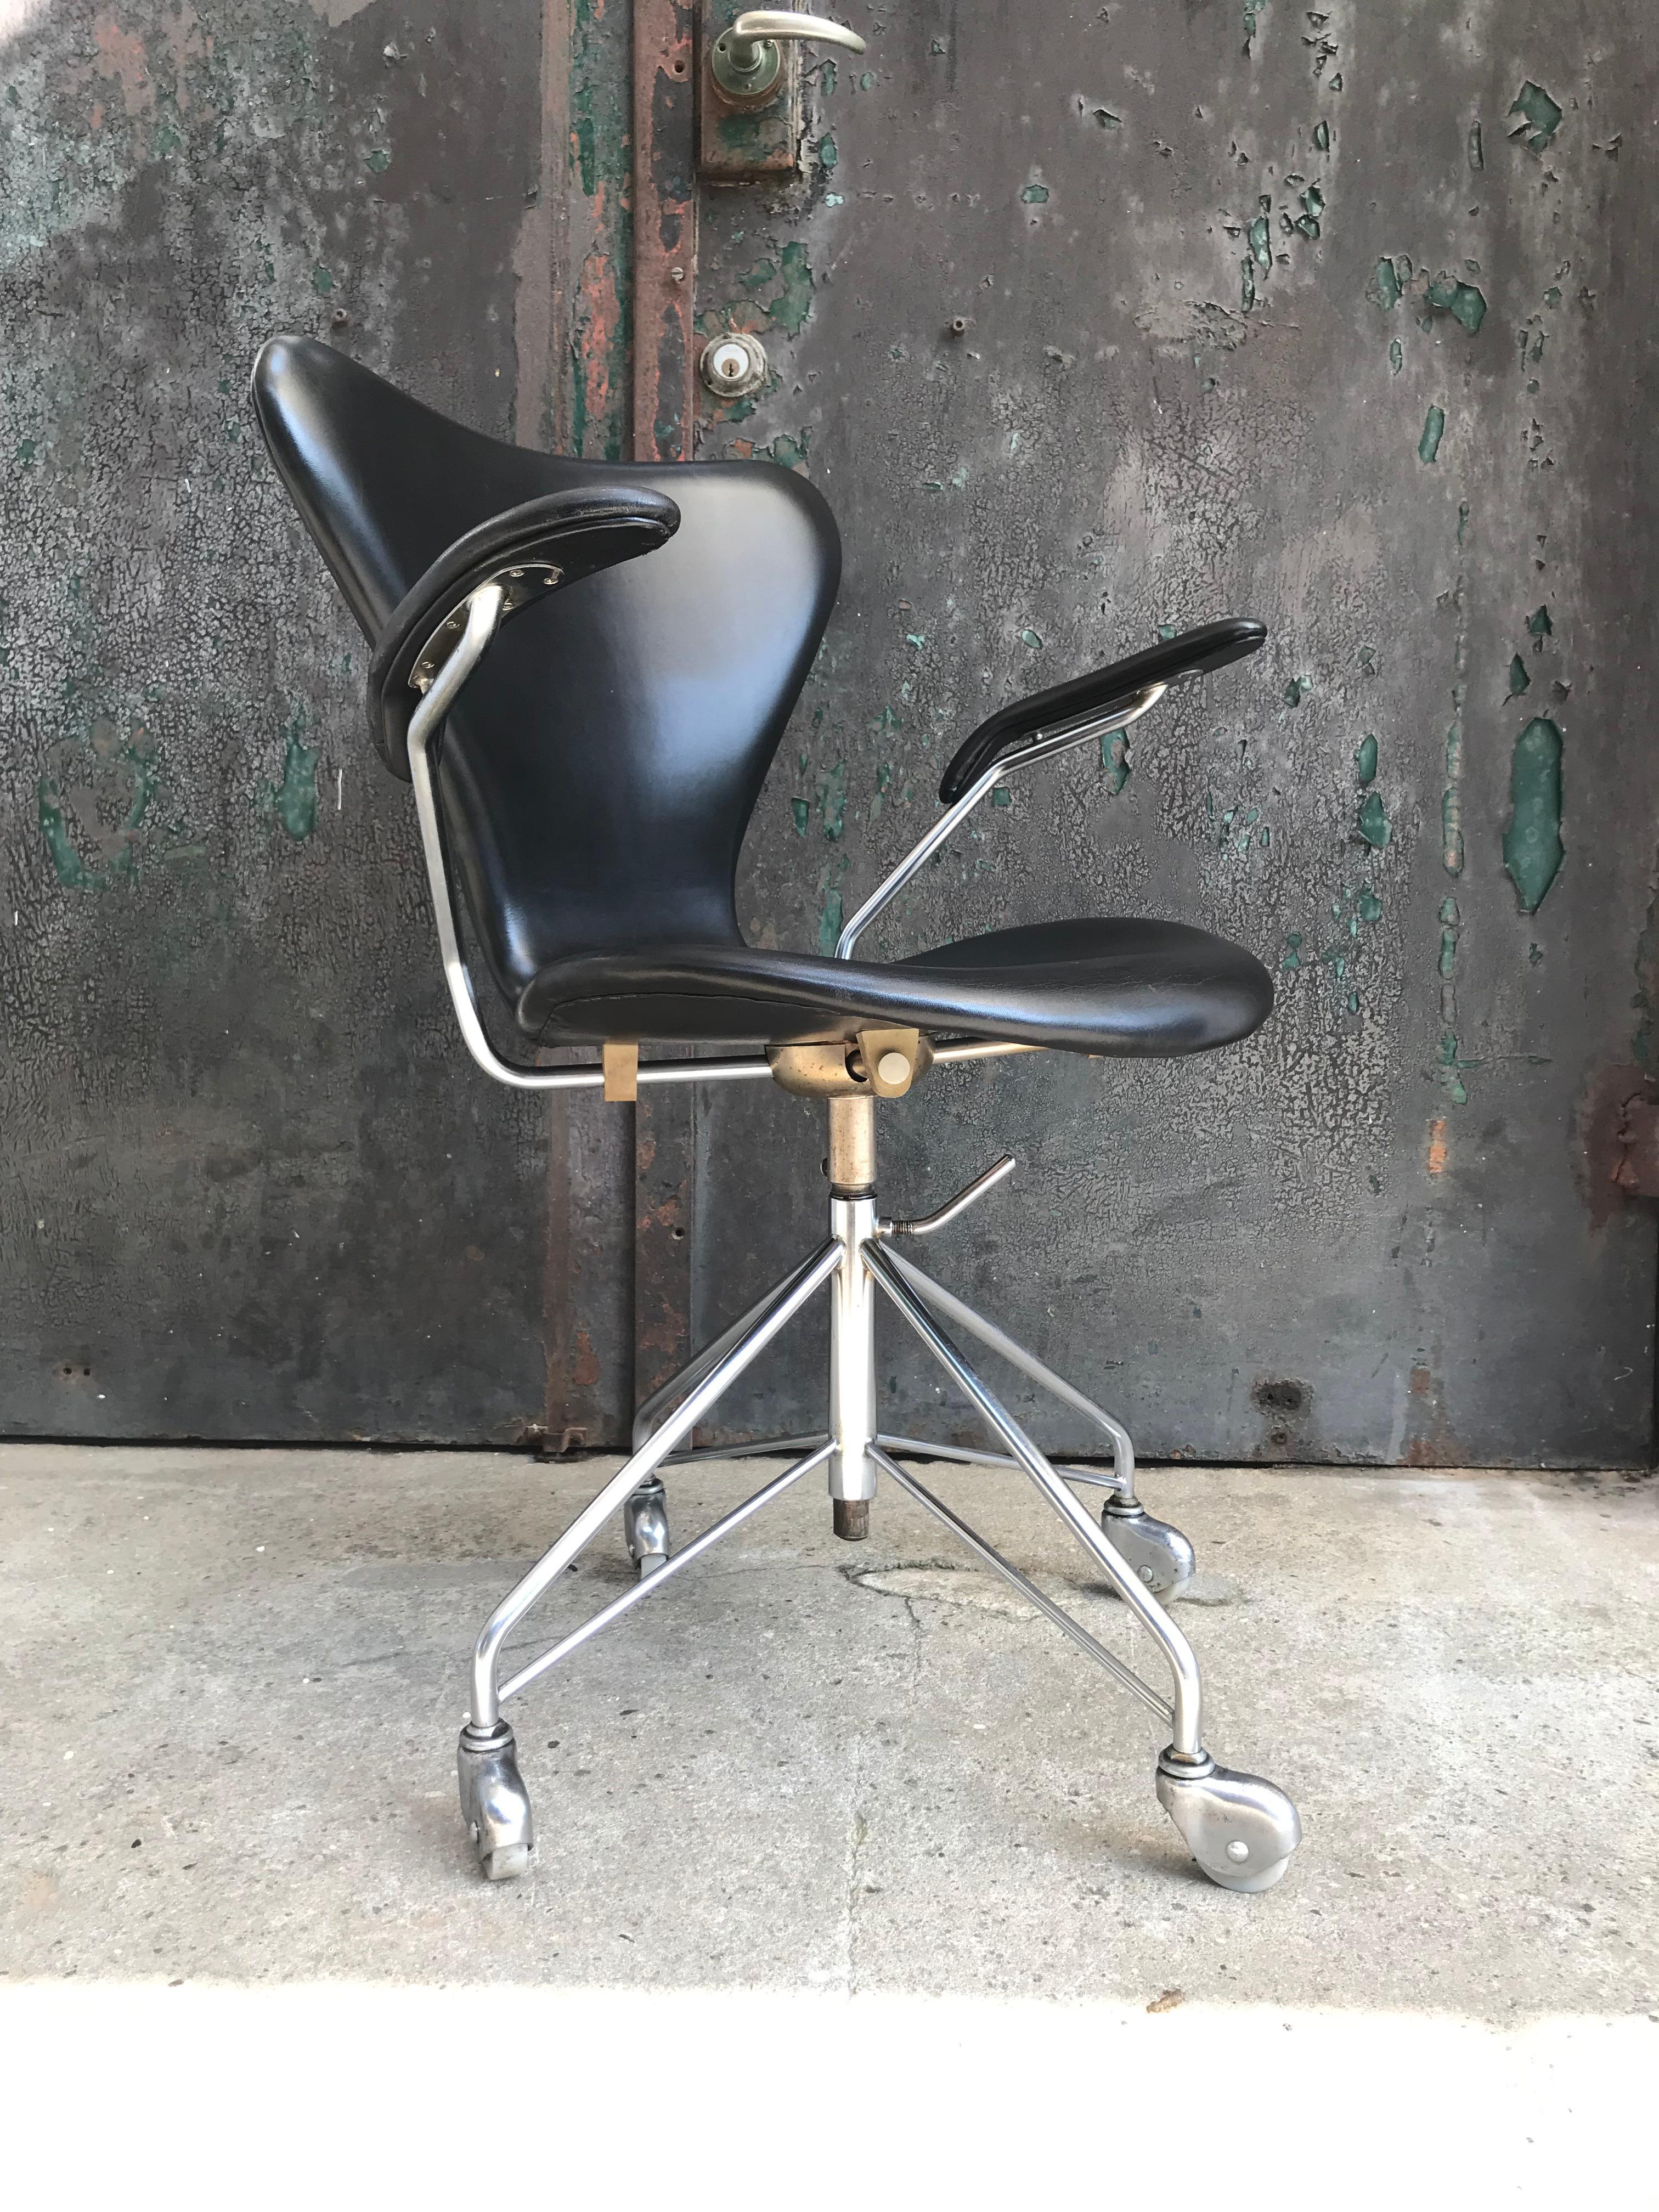 Vintage Arne Jacobsen office swivel stool chair model 3217 from the 1950s
This stool is in great vintage condition
At some point the leather has been refurbished
Everything has been checked and the chair is ready to use
Adjustable height from 40-55